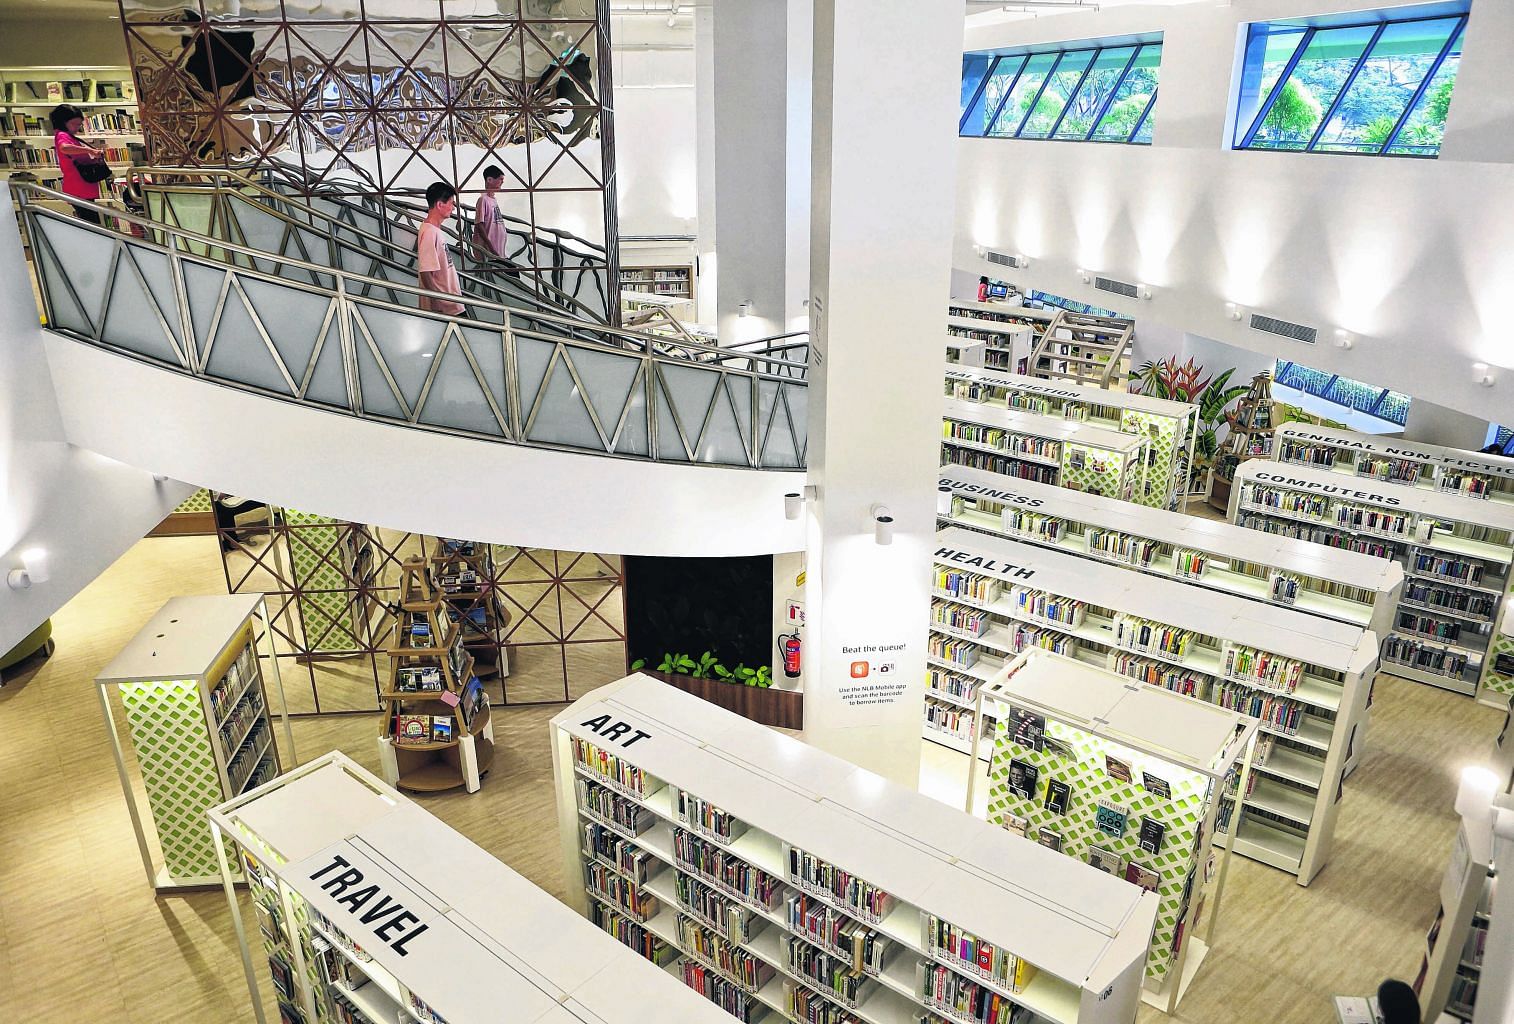 Bedok Public Library is at Heartbeat@ Bedok, an integrated community hub with facilities such as a sports centre, polyclinic and retailers.